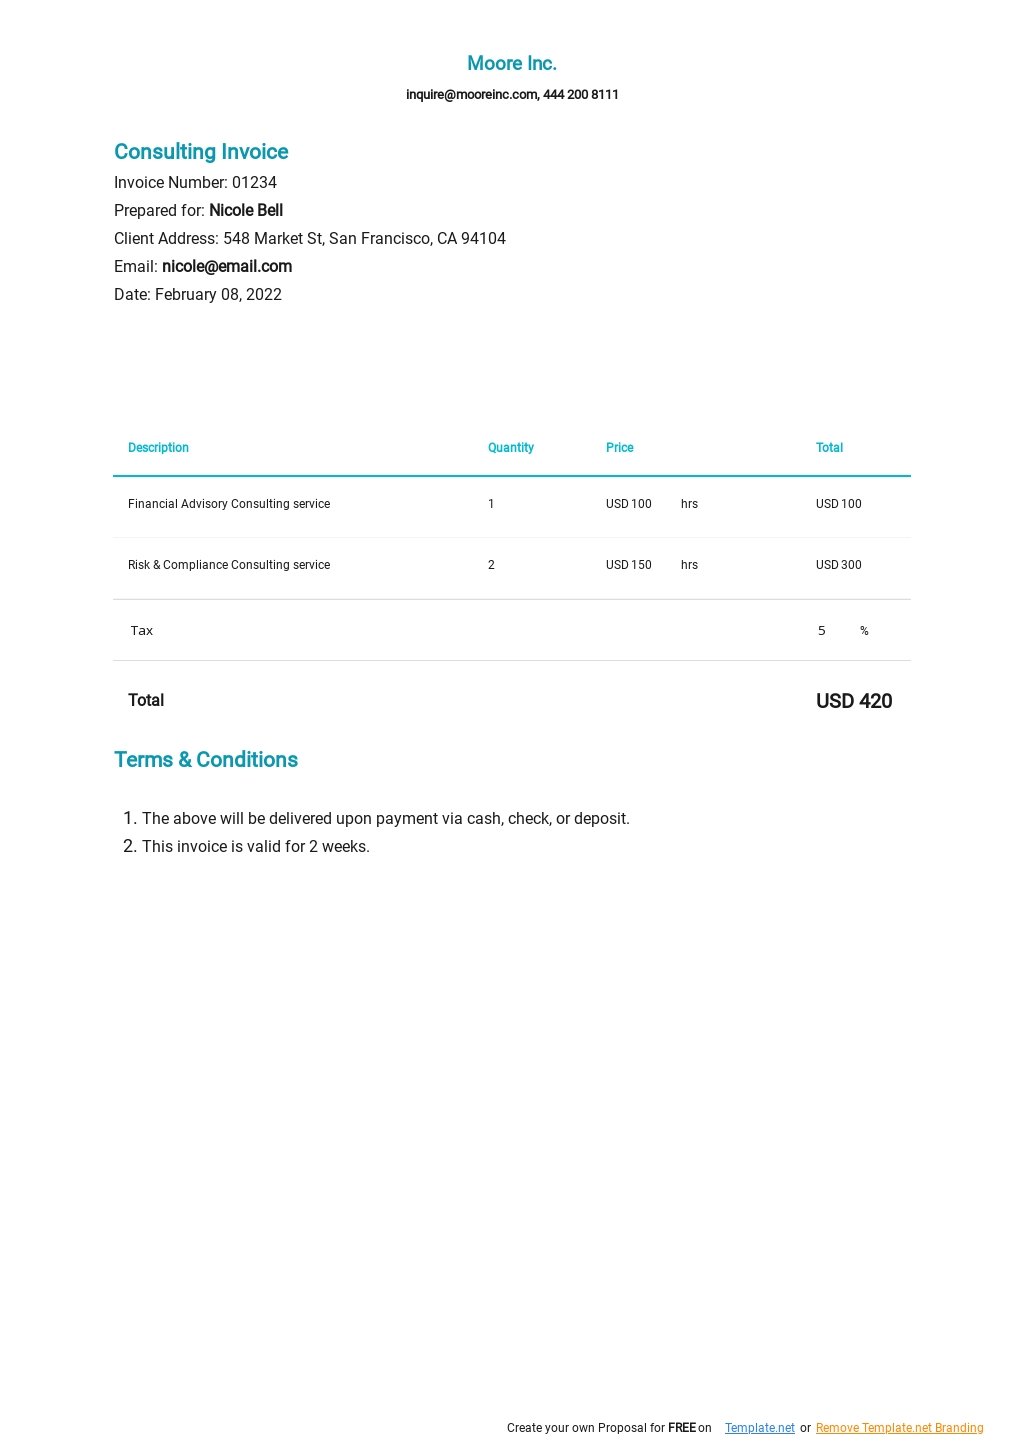 Consulting Invoice Template.jpe